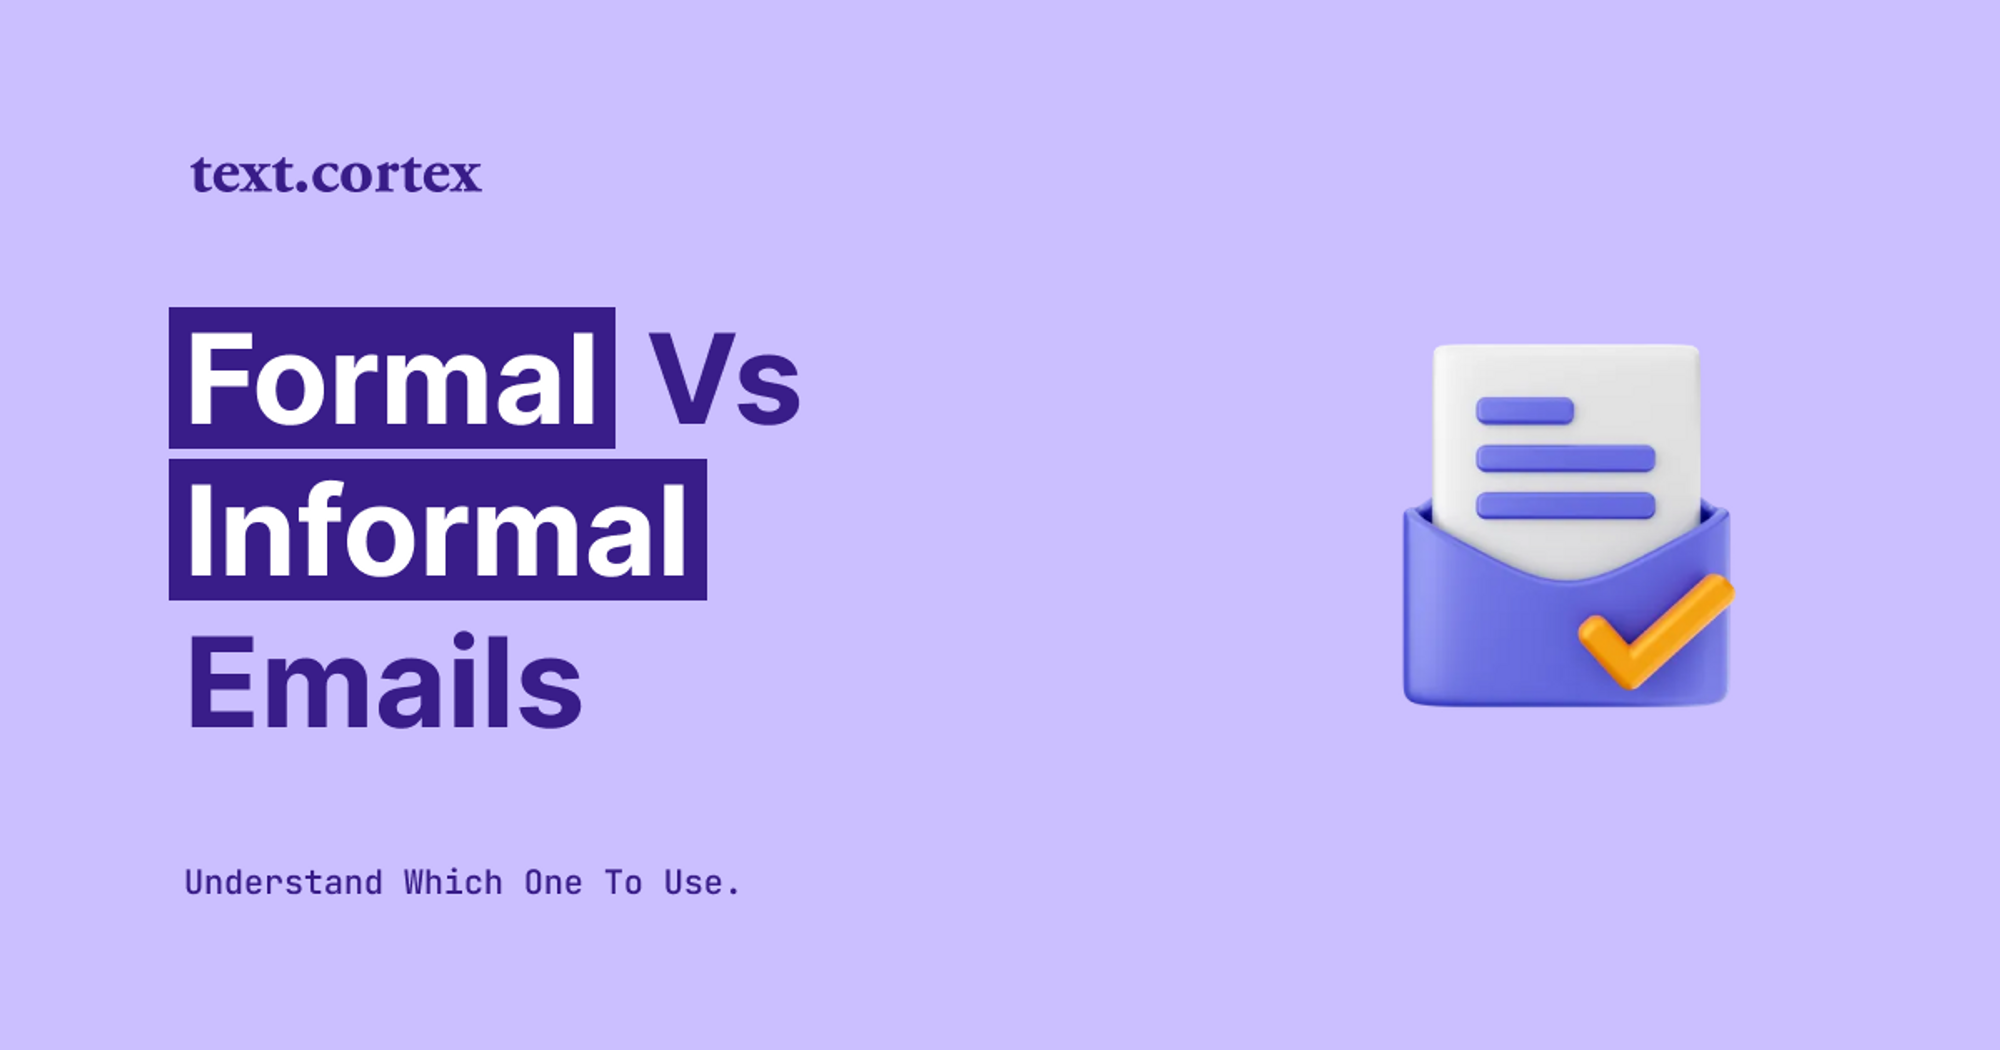 Formal vs Informal Emails - Understand Which One To Use